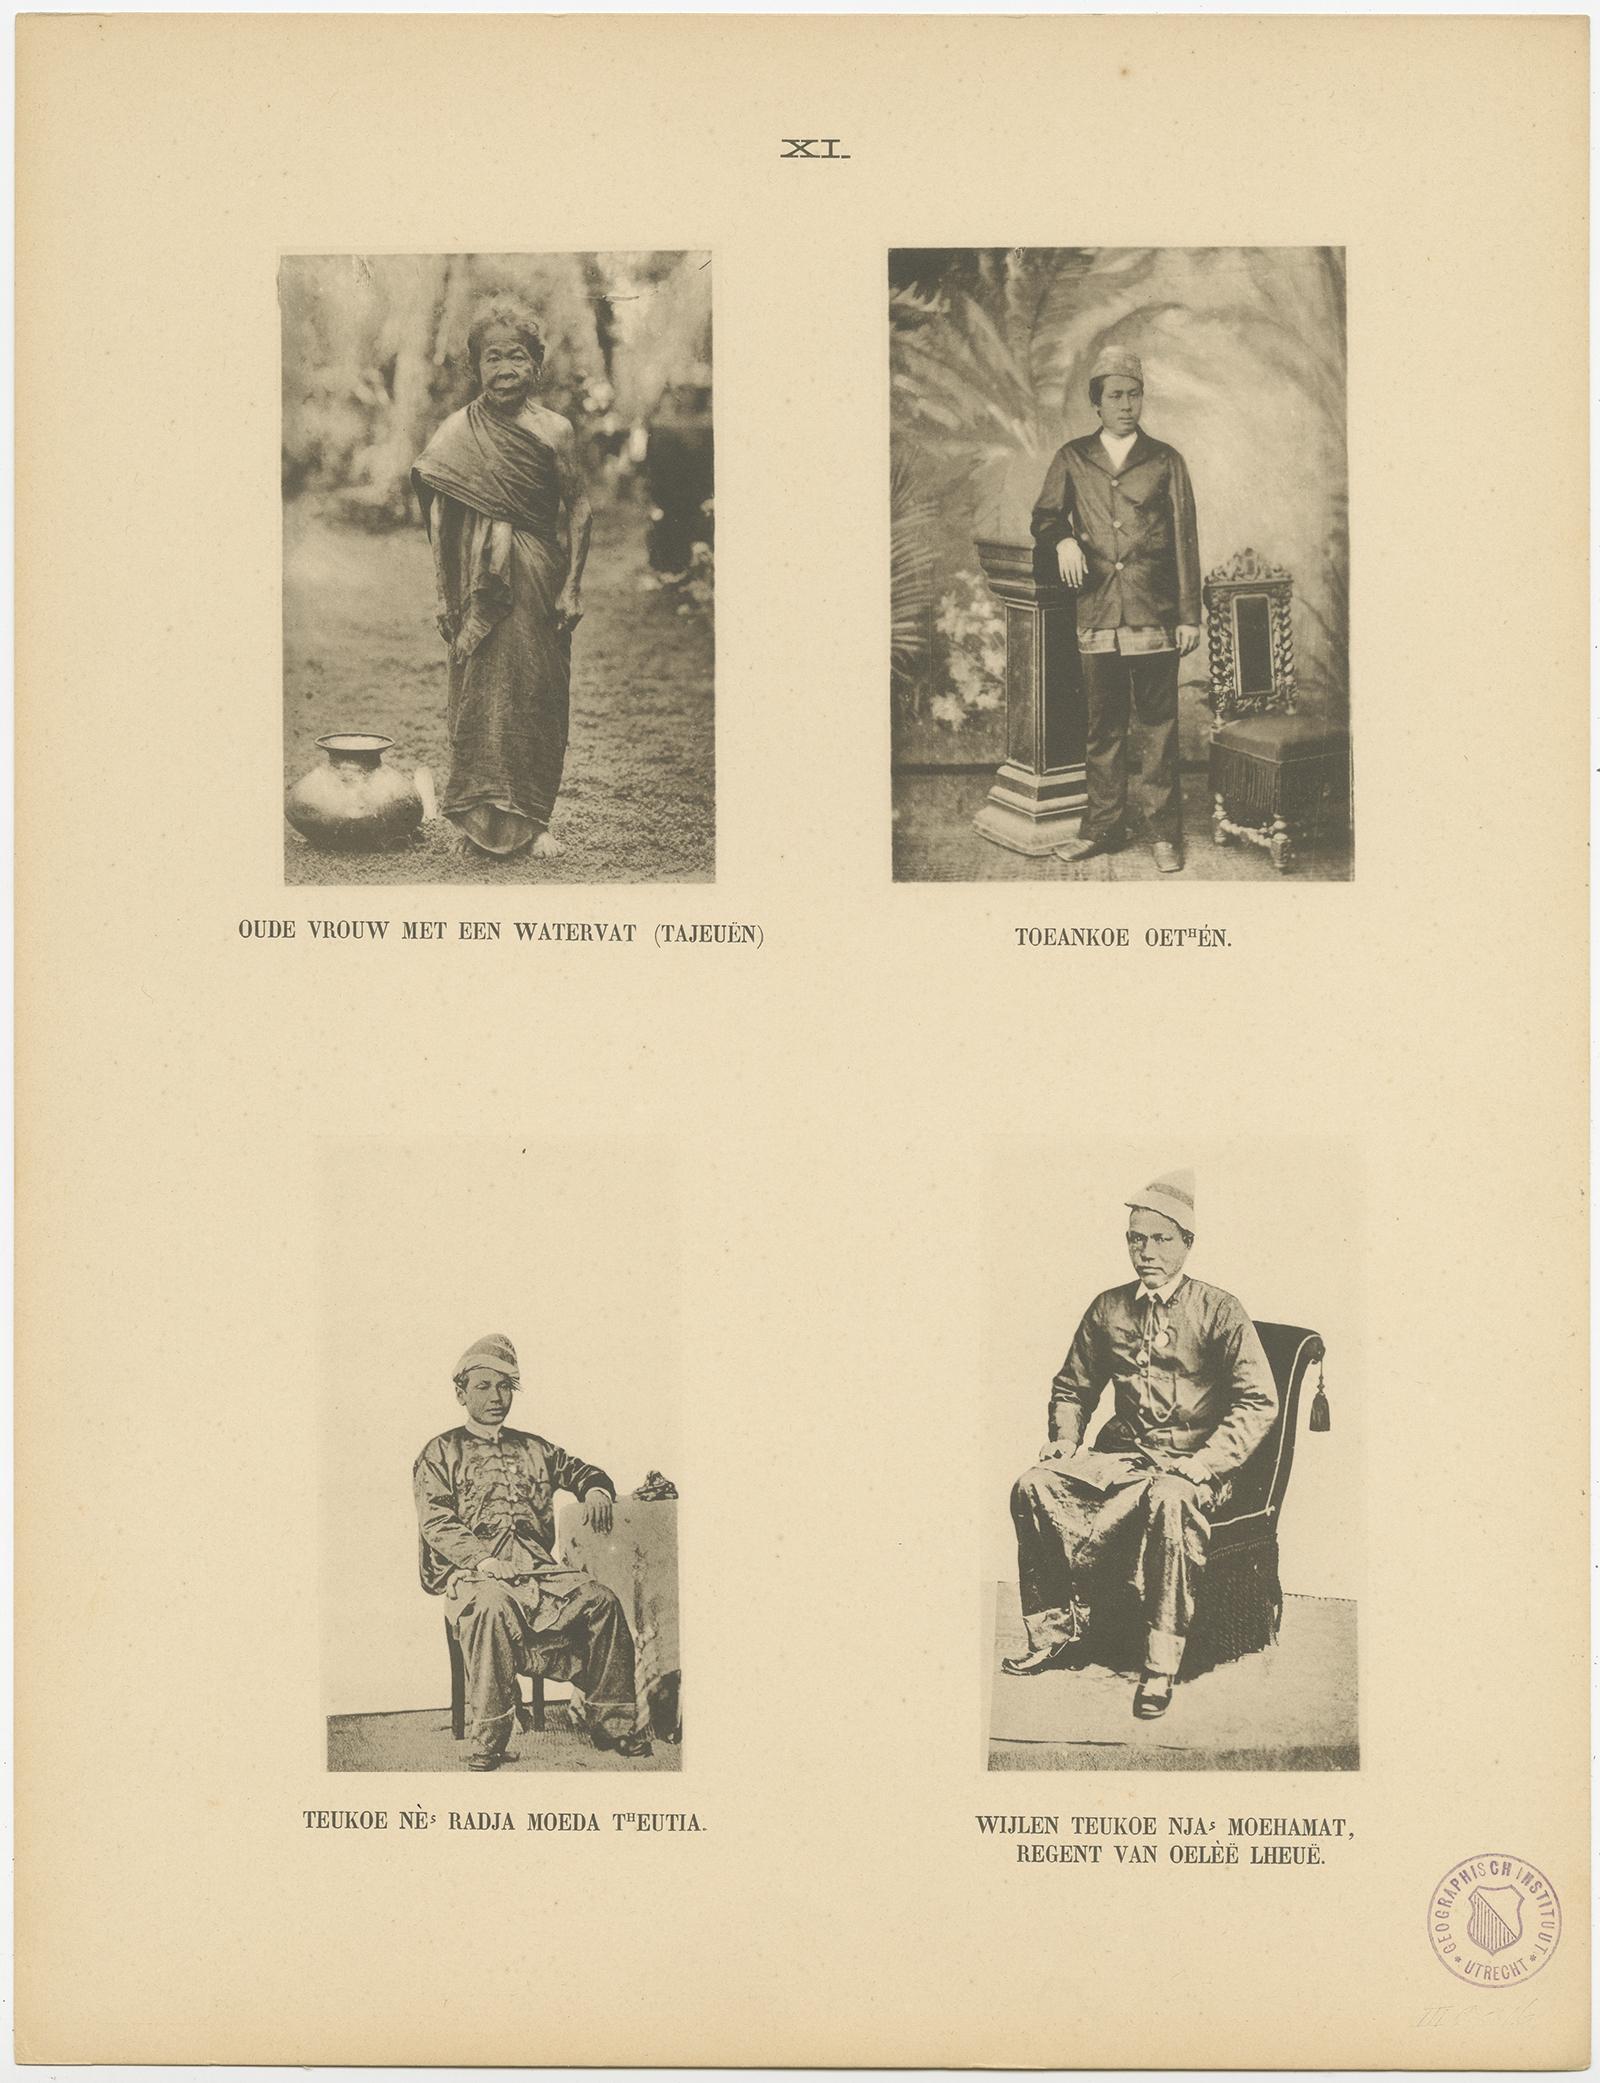 Twelve Prints of Aceh 'Atjeh' Published by E.J. Brill, '1895' For Sale 7